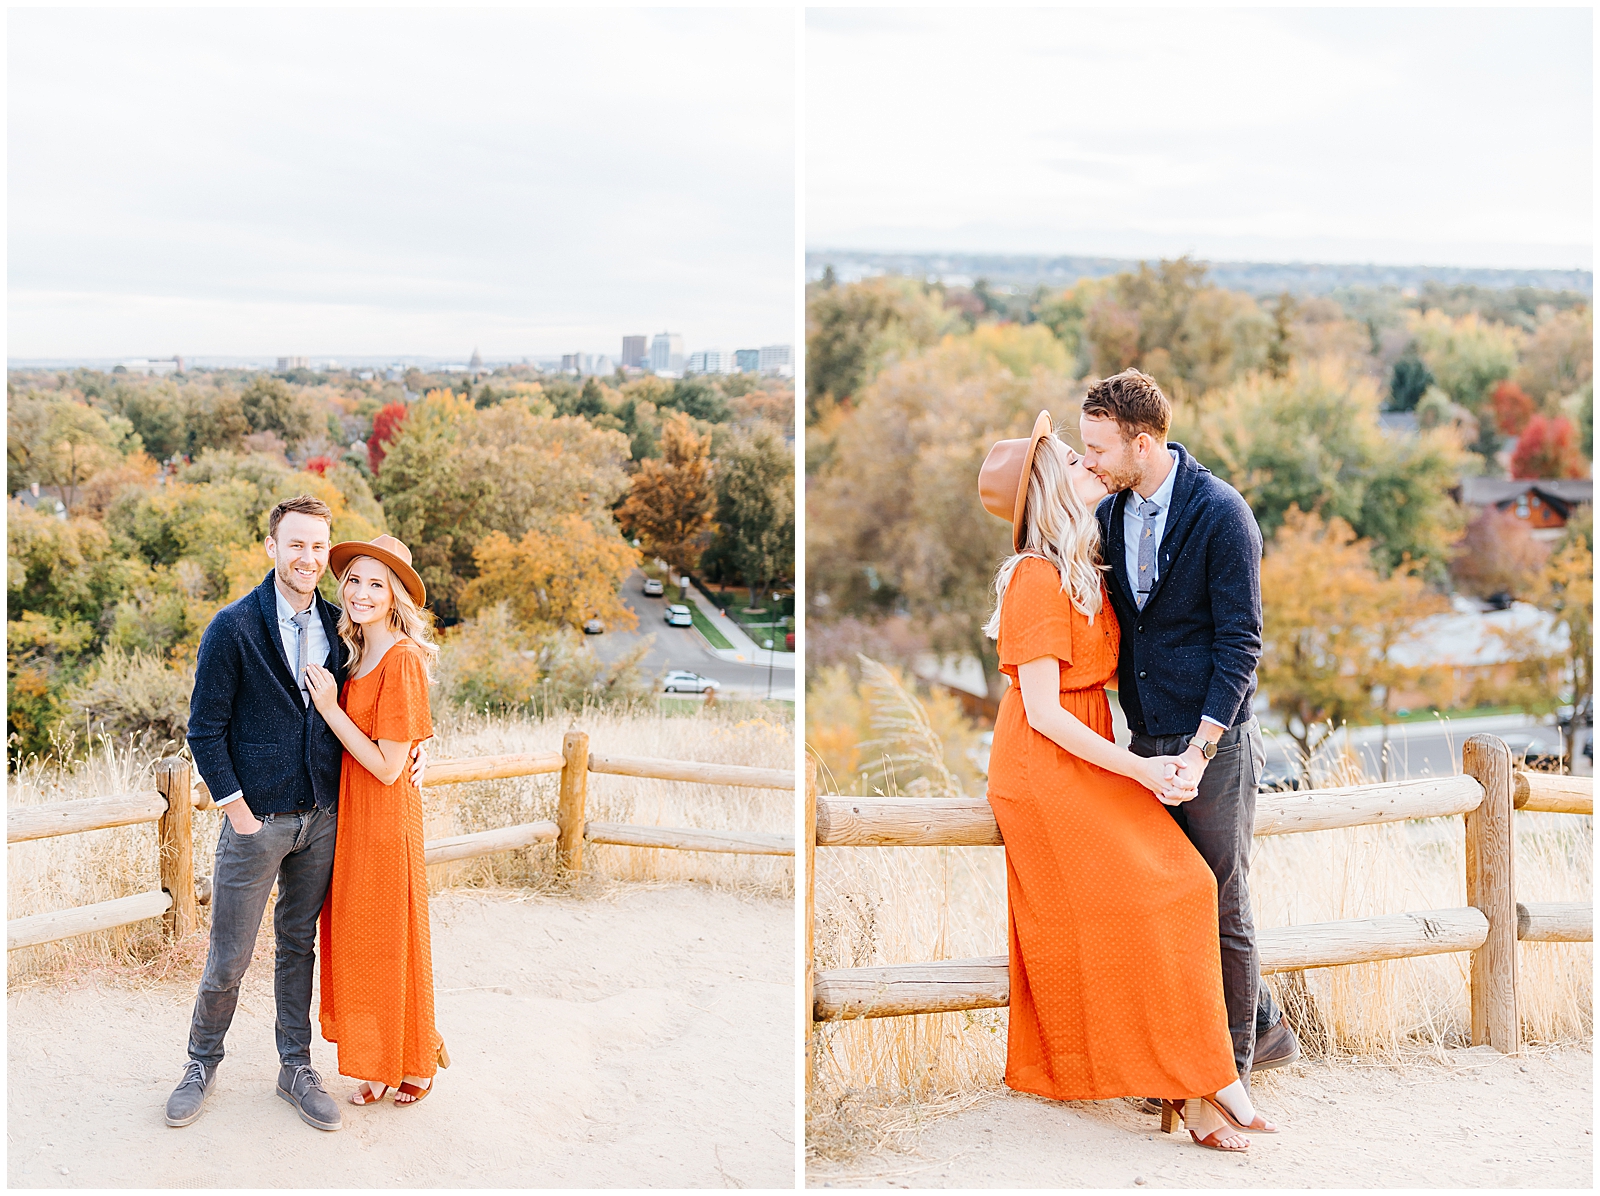 Dreamy Fall Engagement Photos in Boise Idaho October